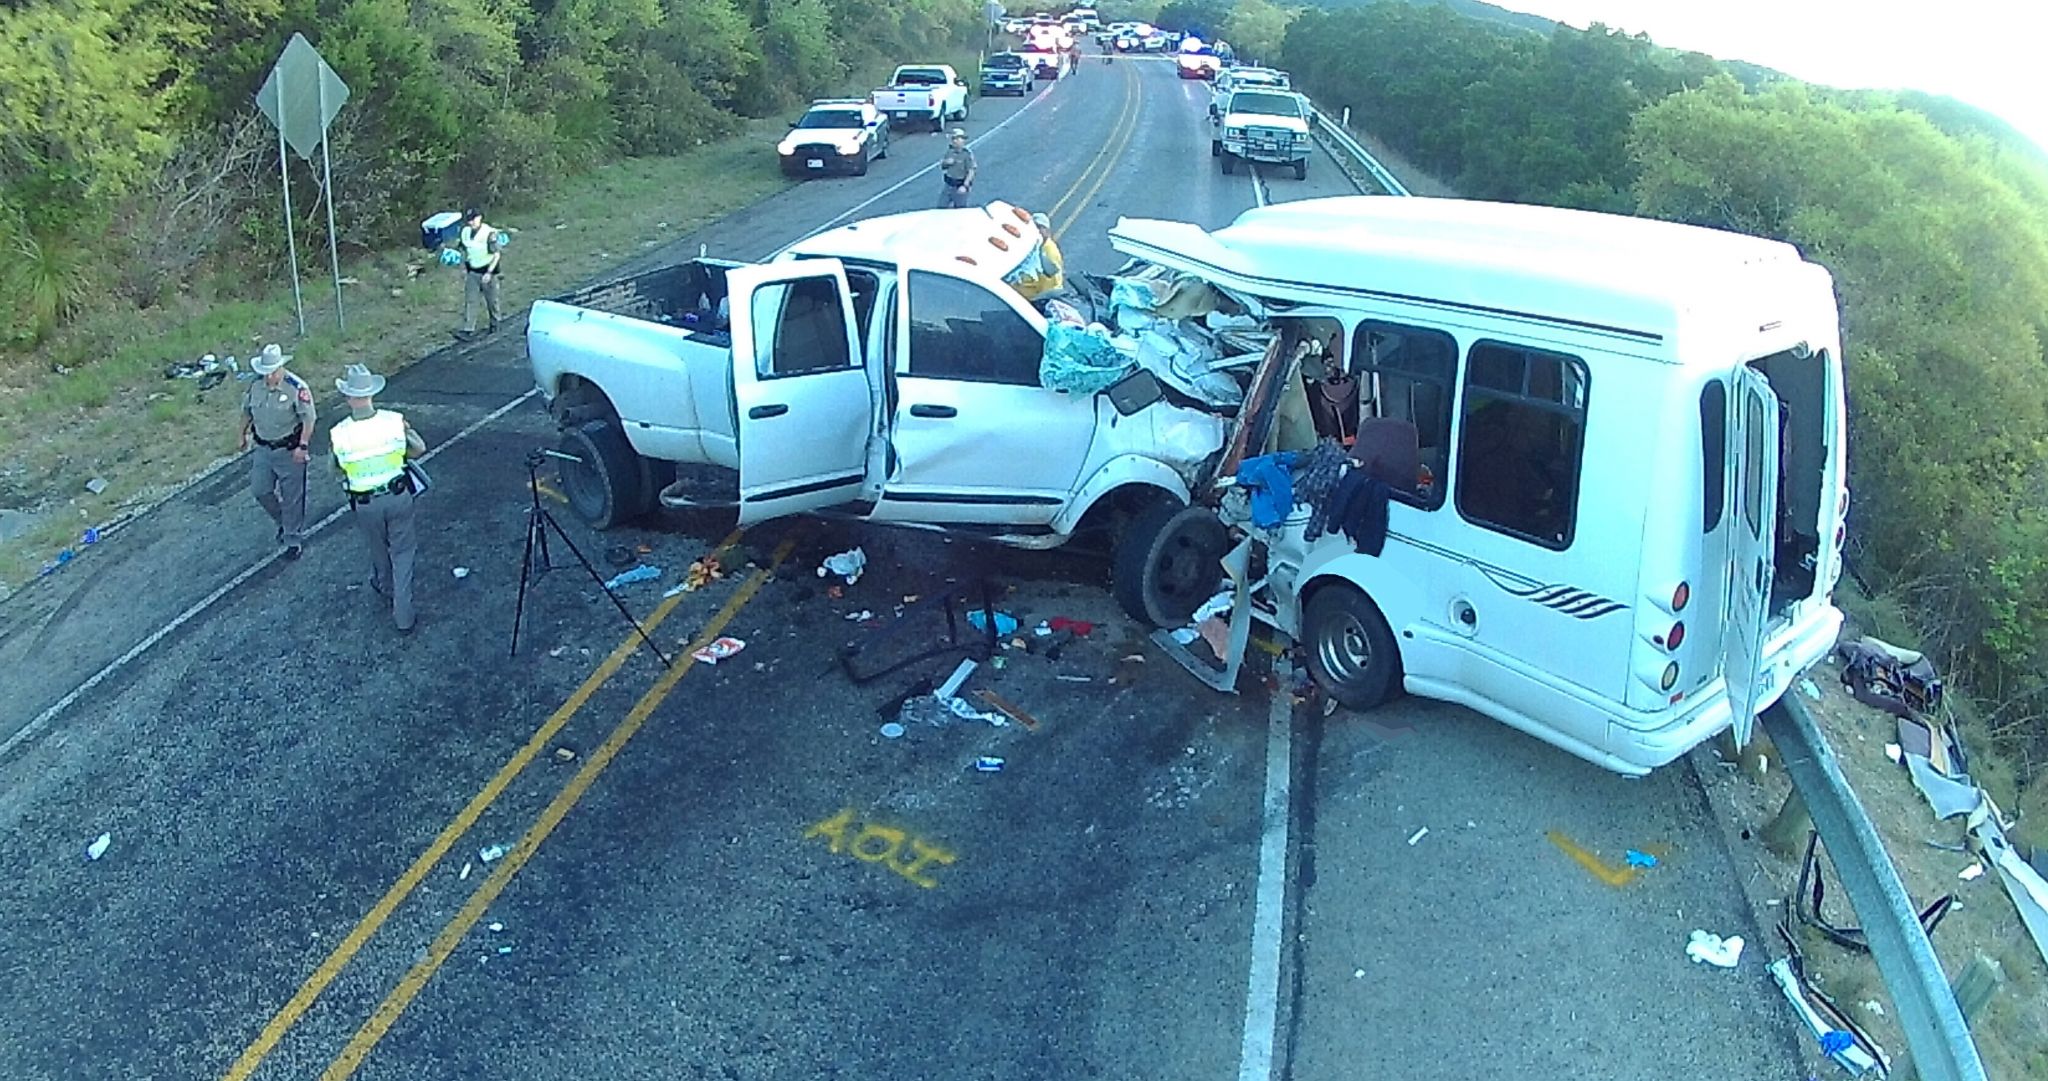 NTSB releases new details in South Texas church bus crash that killed 13